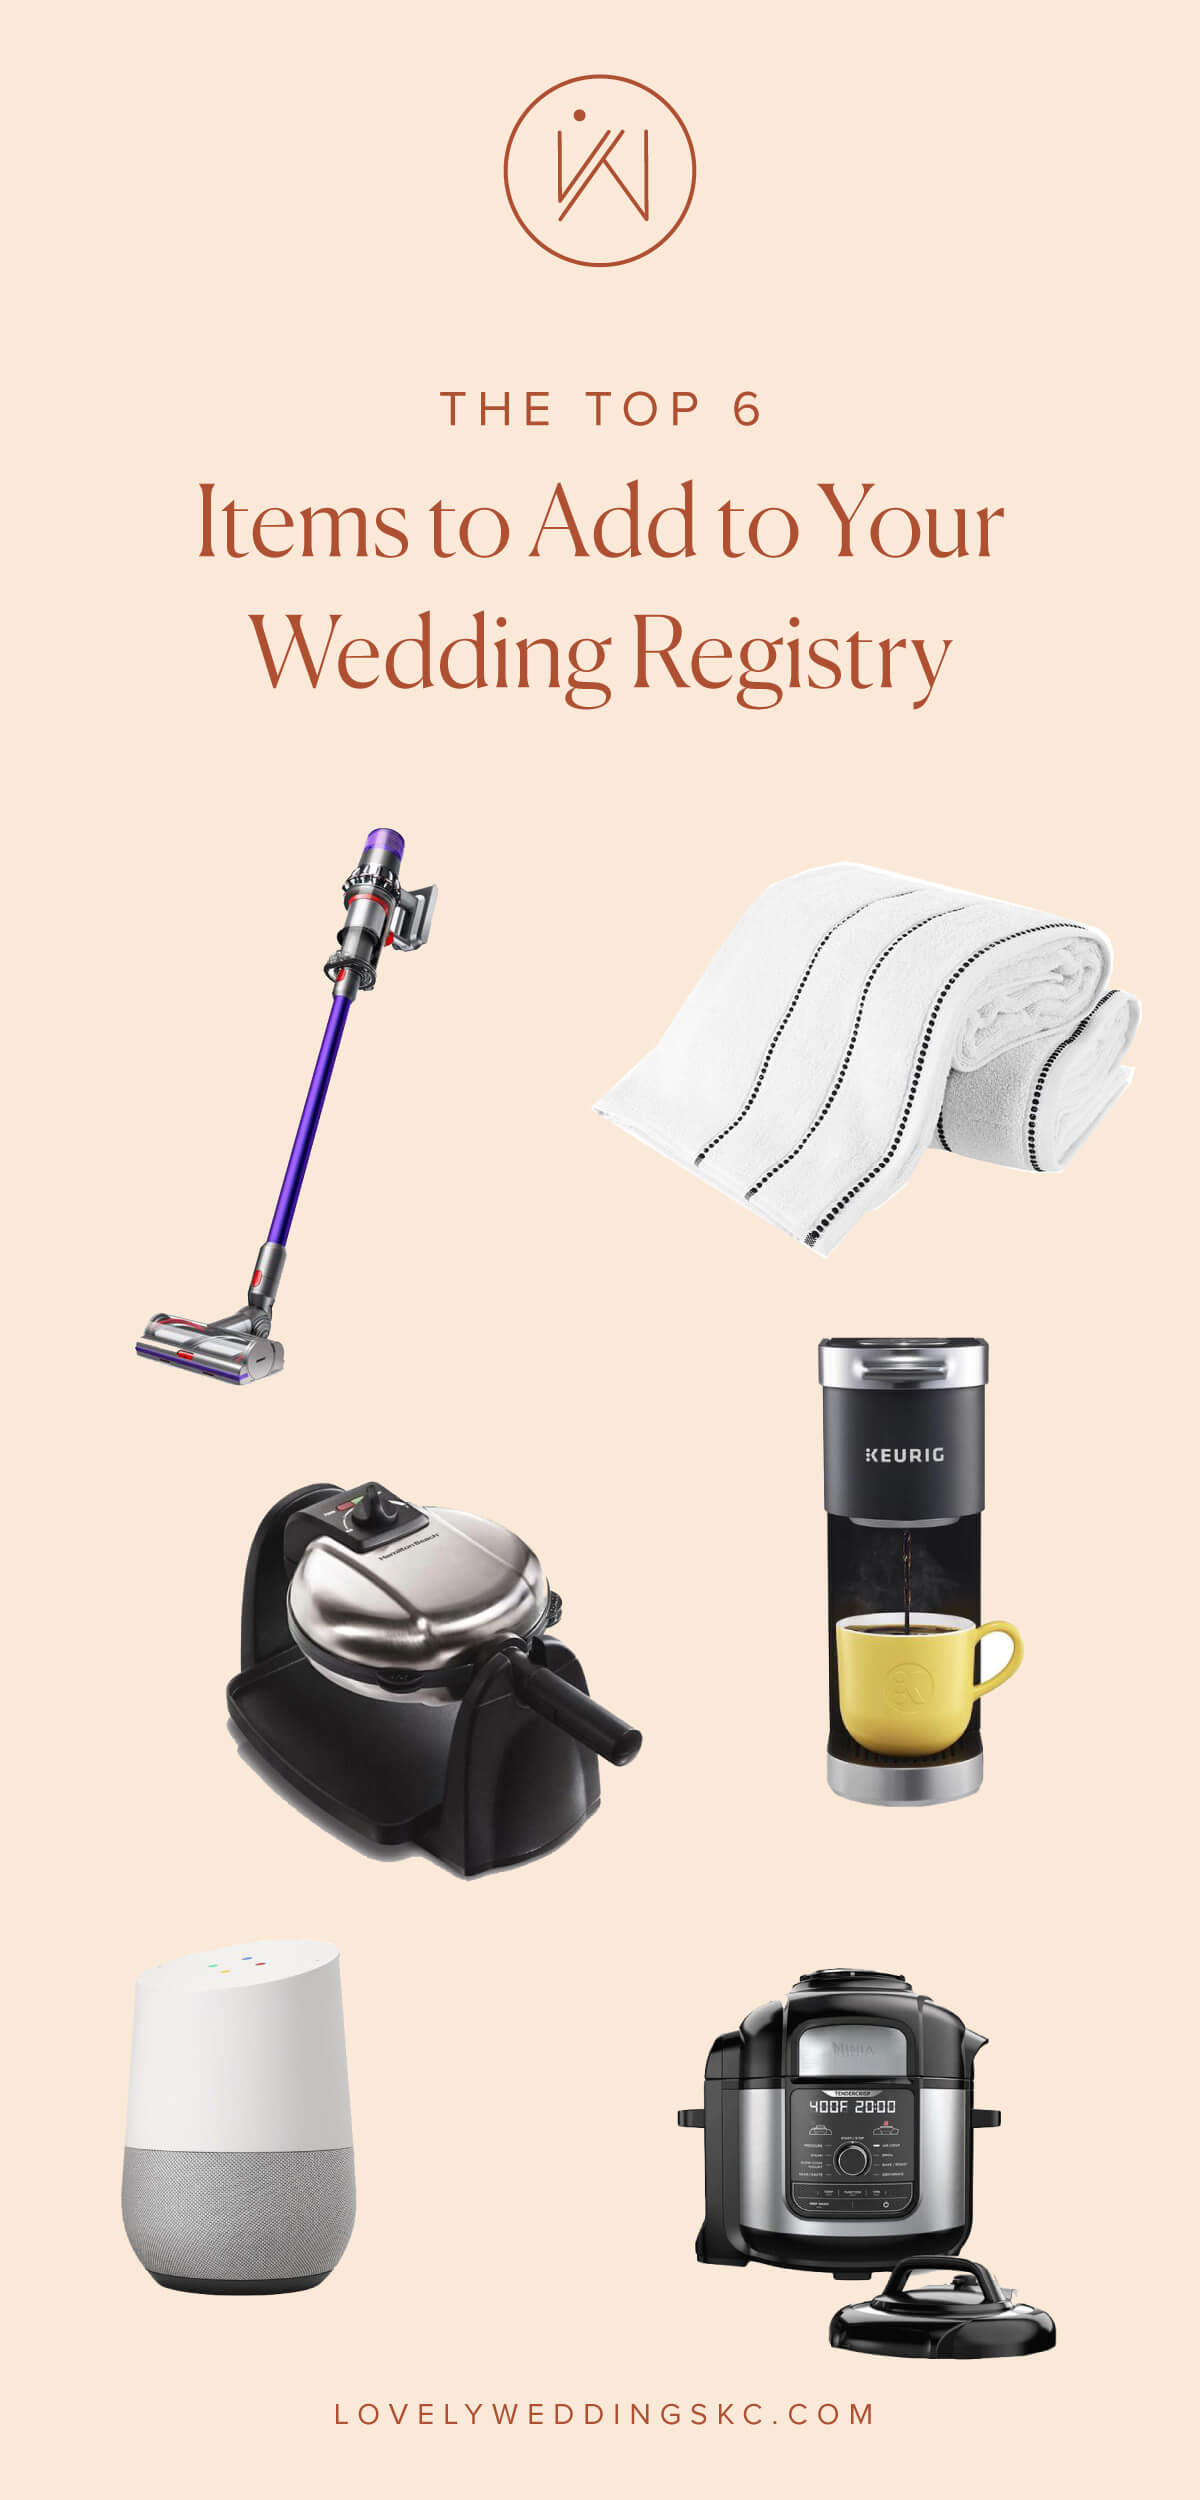 10 Best-Selling Gifts to Add to Your  Wedding Registry – StyleCaster